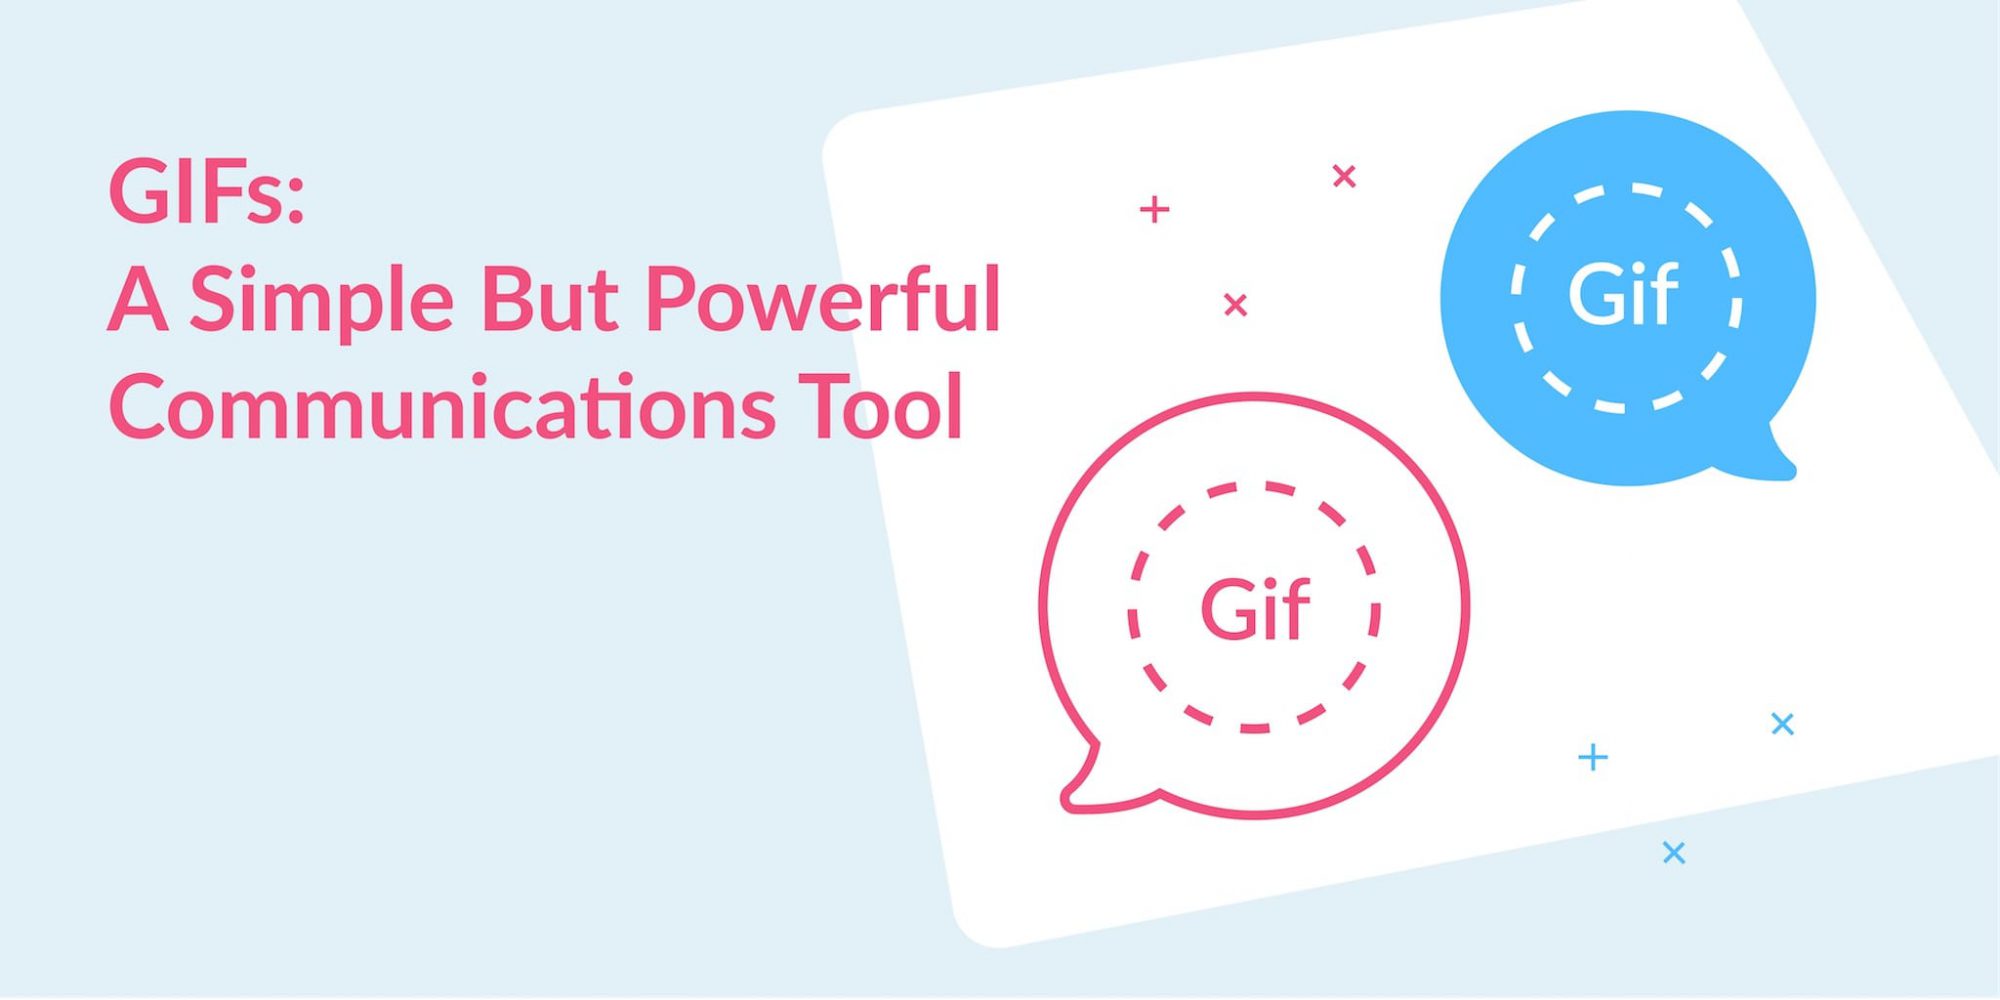 4 Ways to Use GIFs in Everyday Communication